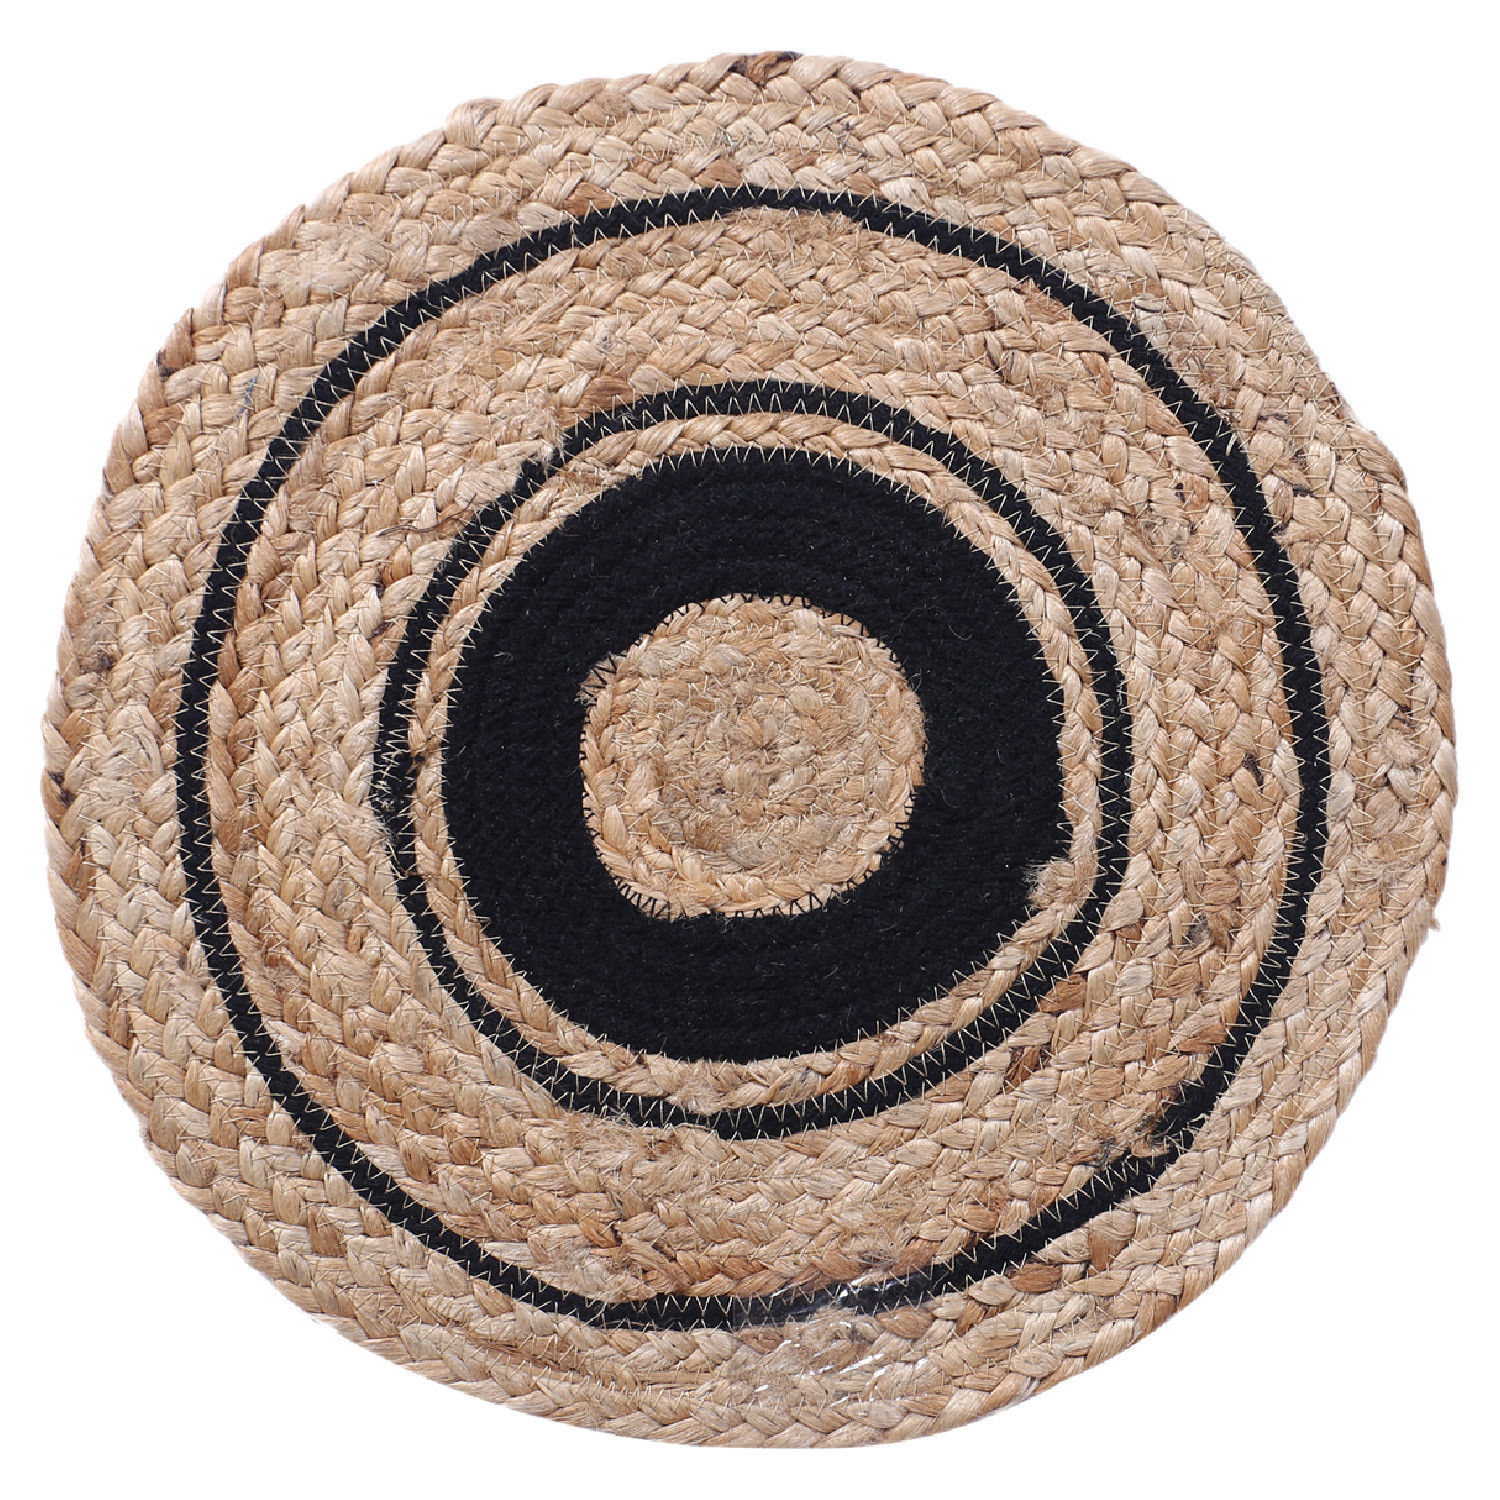 Kuber Industries Handmade Carpet|Cotton Circular Shape Black Layer Placemat|Jute Table Top Mat For Living Room,Dining Room & Home Décor,35x35 cm,(Brown)